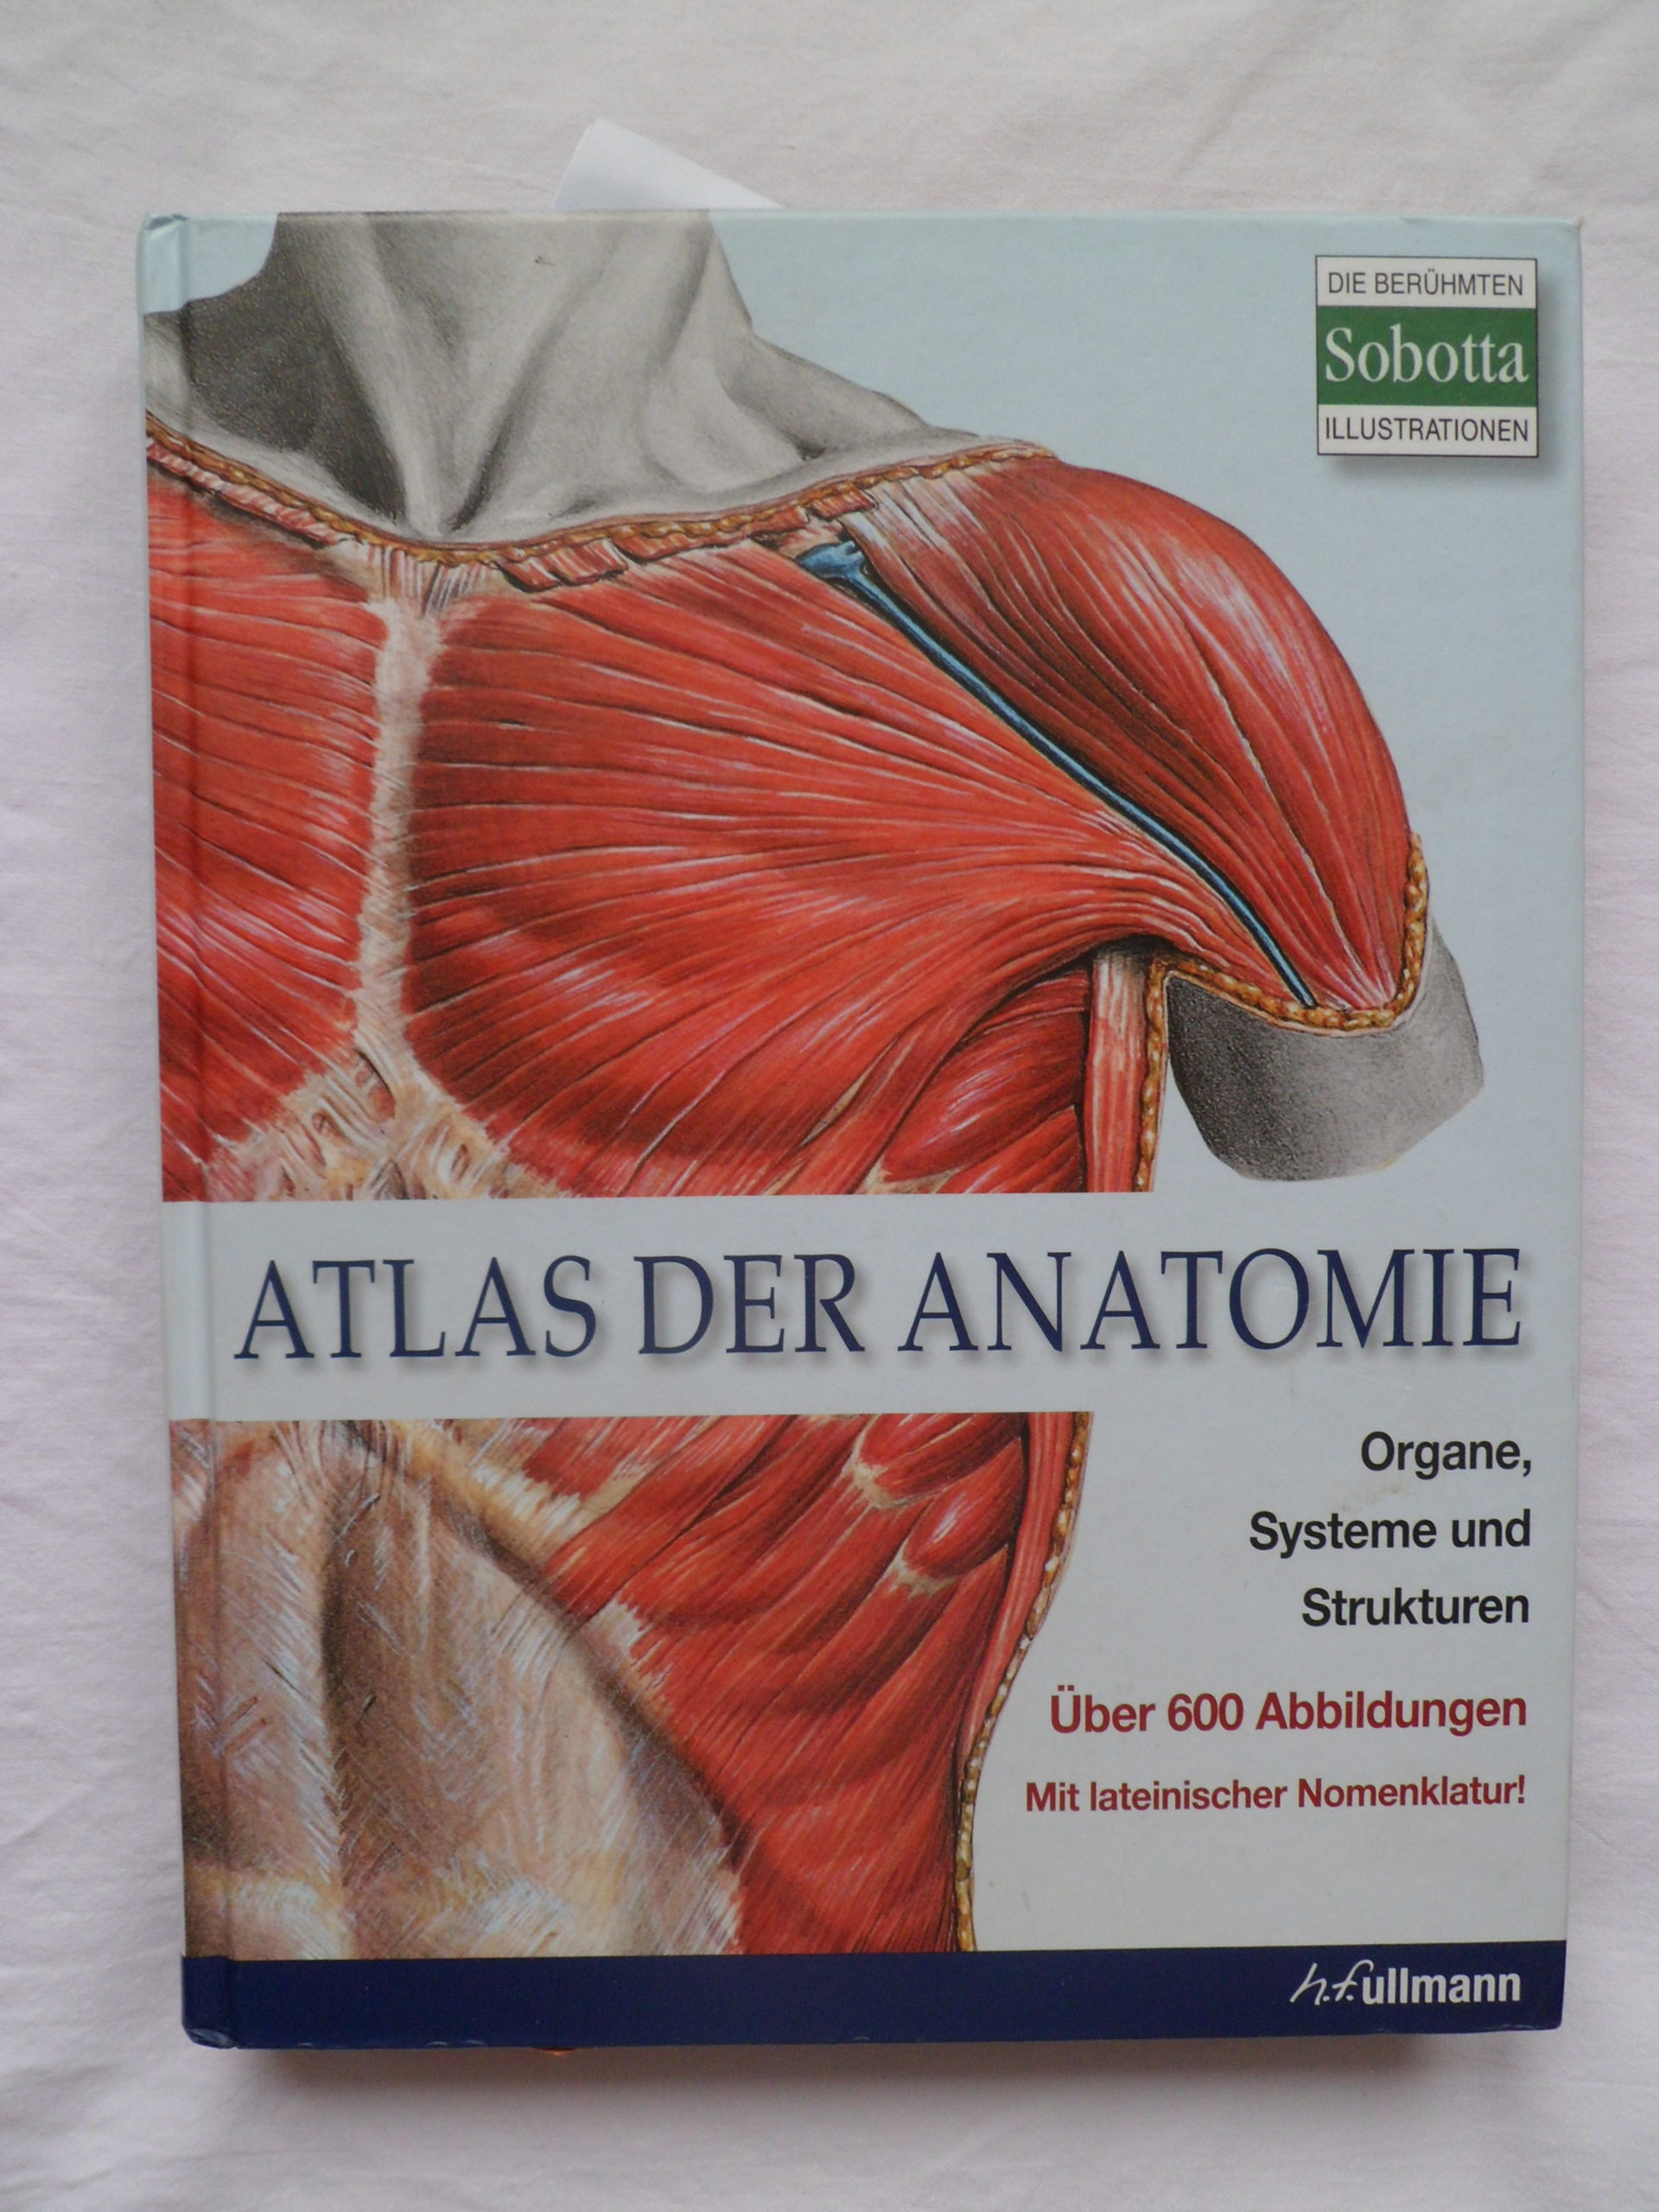 You are currently viewing Atlas der Anatomie